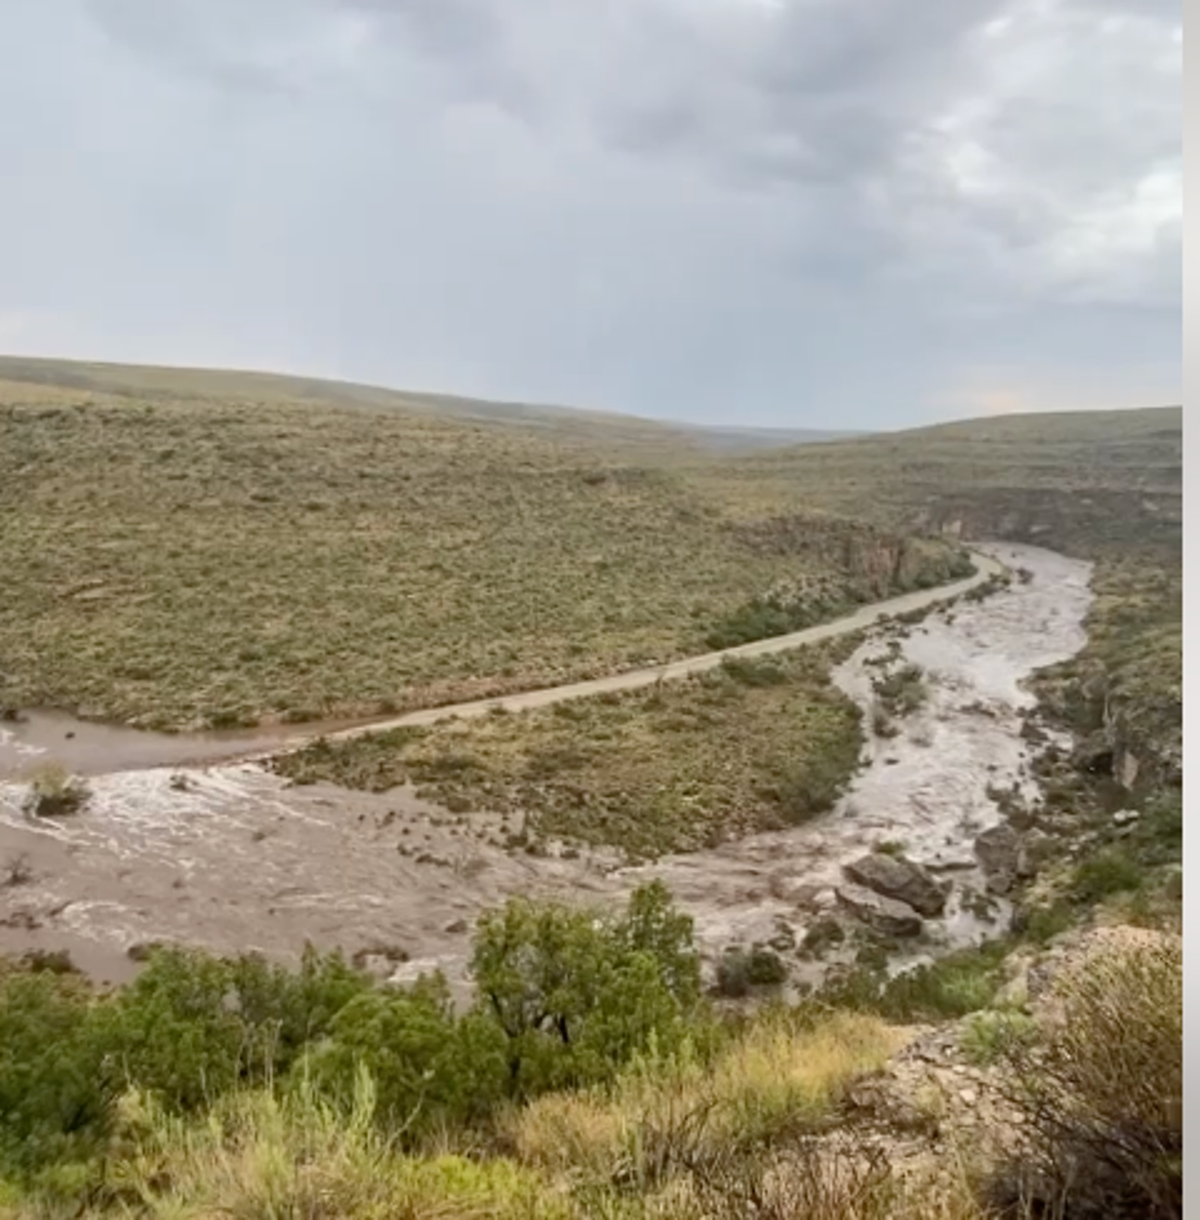 Children among 200 people rescued from Carlsbad Caverns after being stranded by flooding